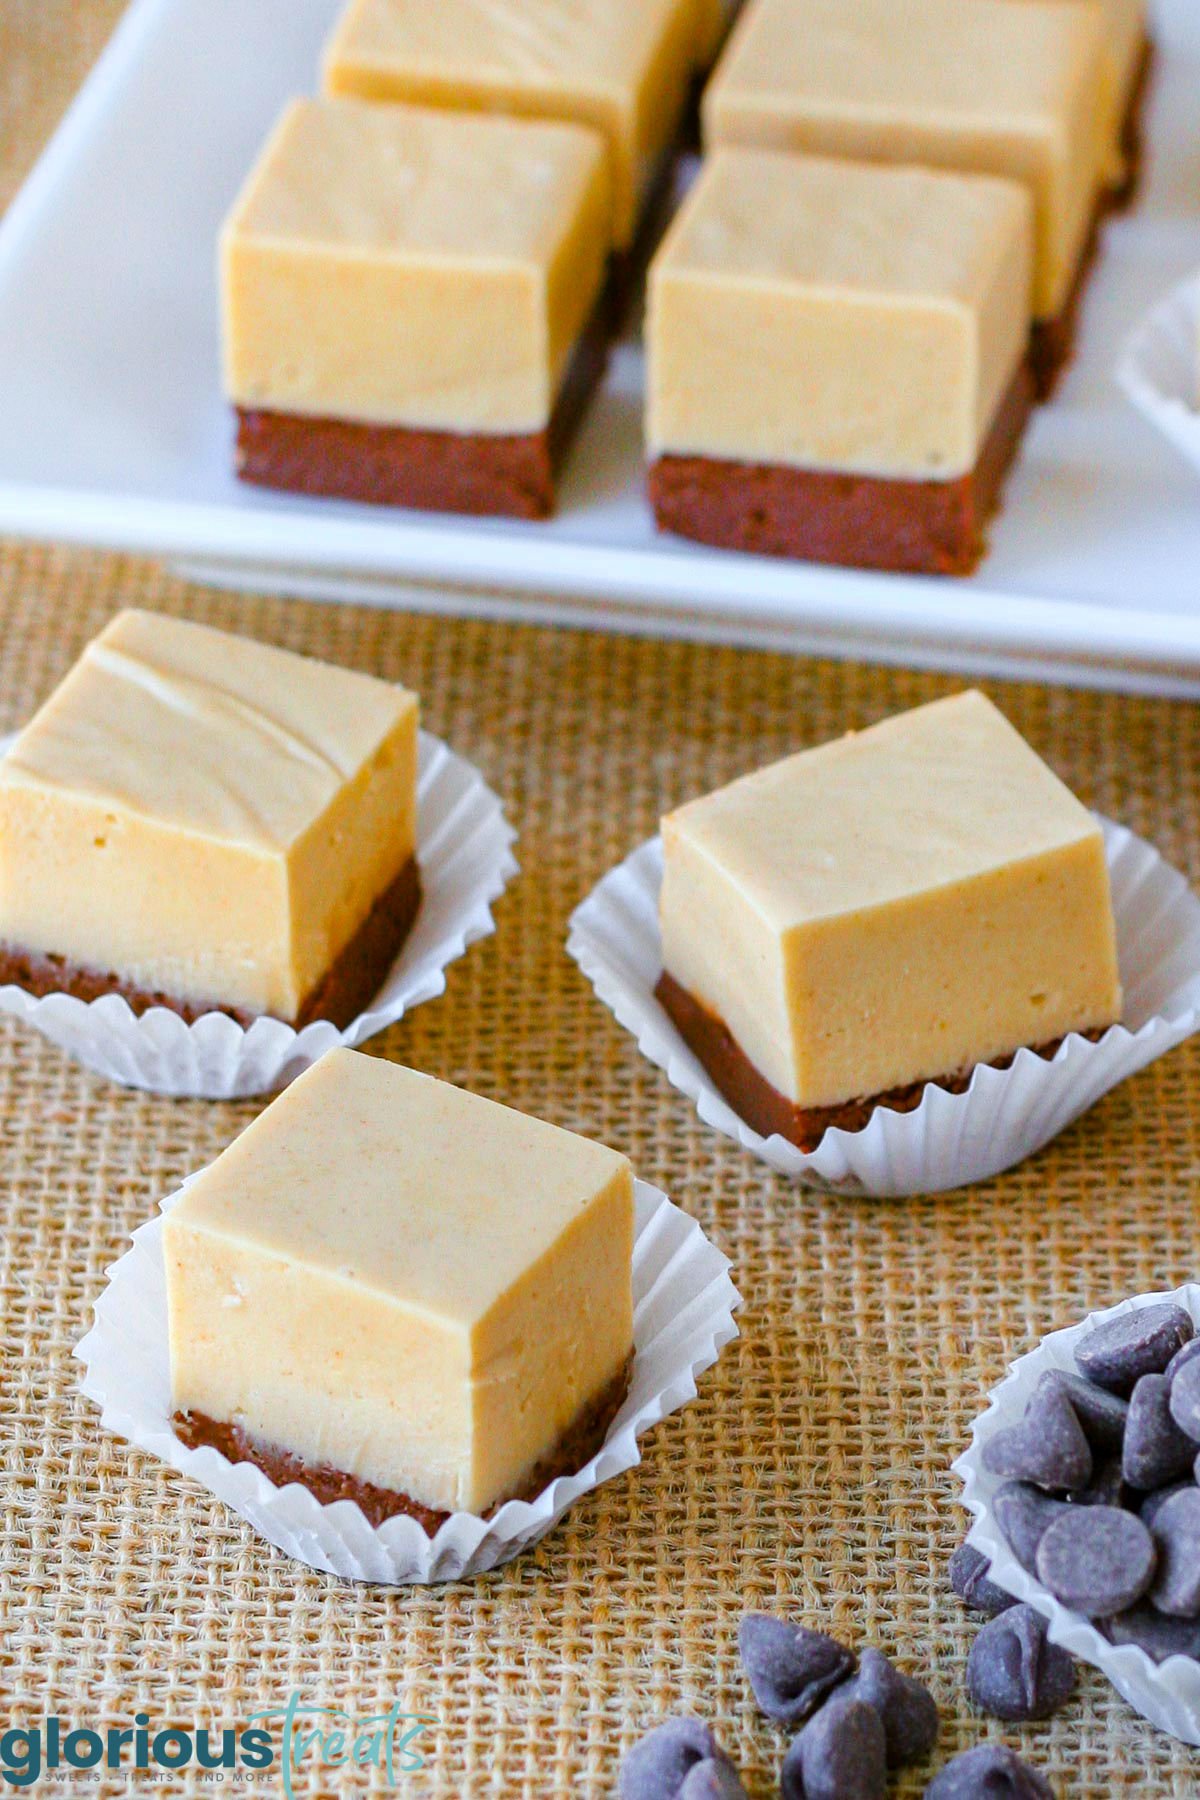 pieces of chocolate peanut butter fudge cut into squares sitting on burlap with more on white tray in background.